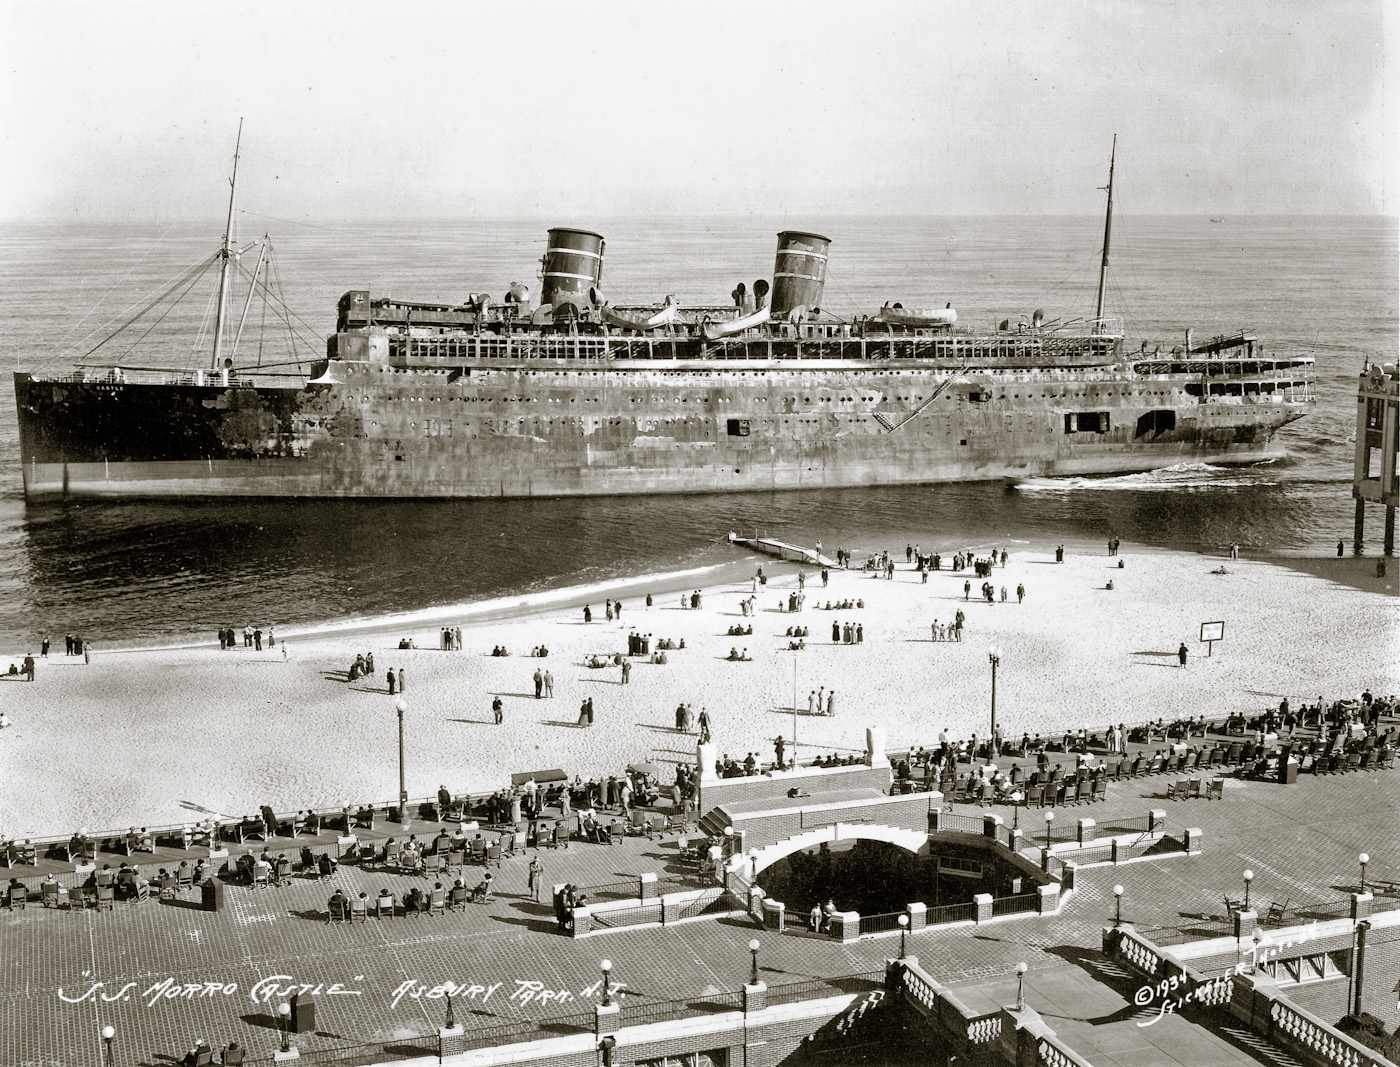 Asbury Park, A few days after September 8, 1934. The Morro Castle was a steamship that burned. View full size